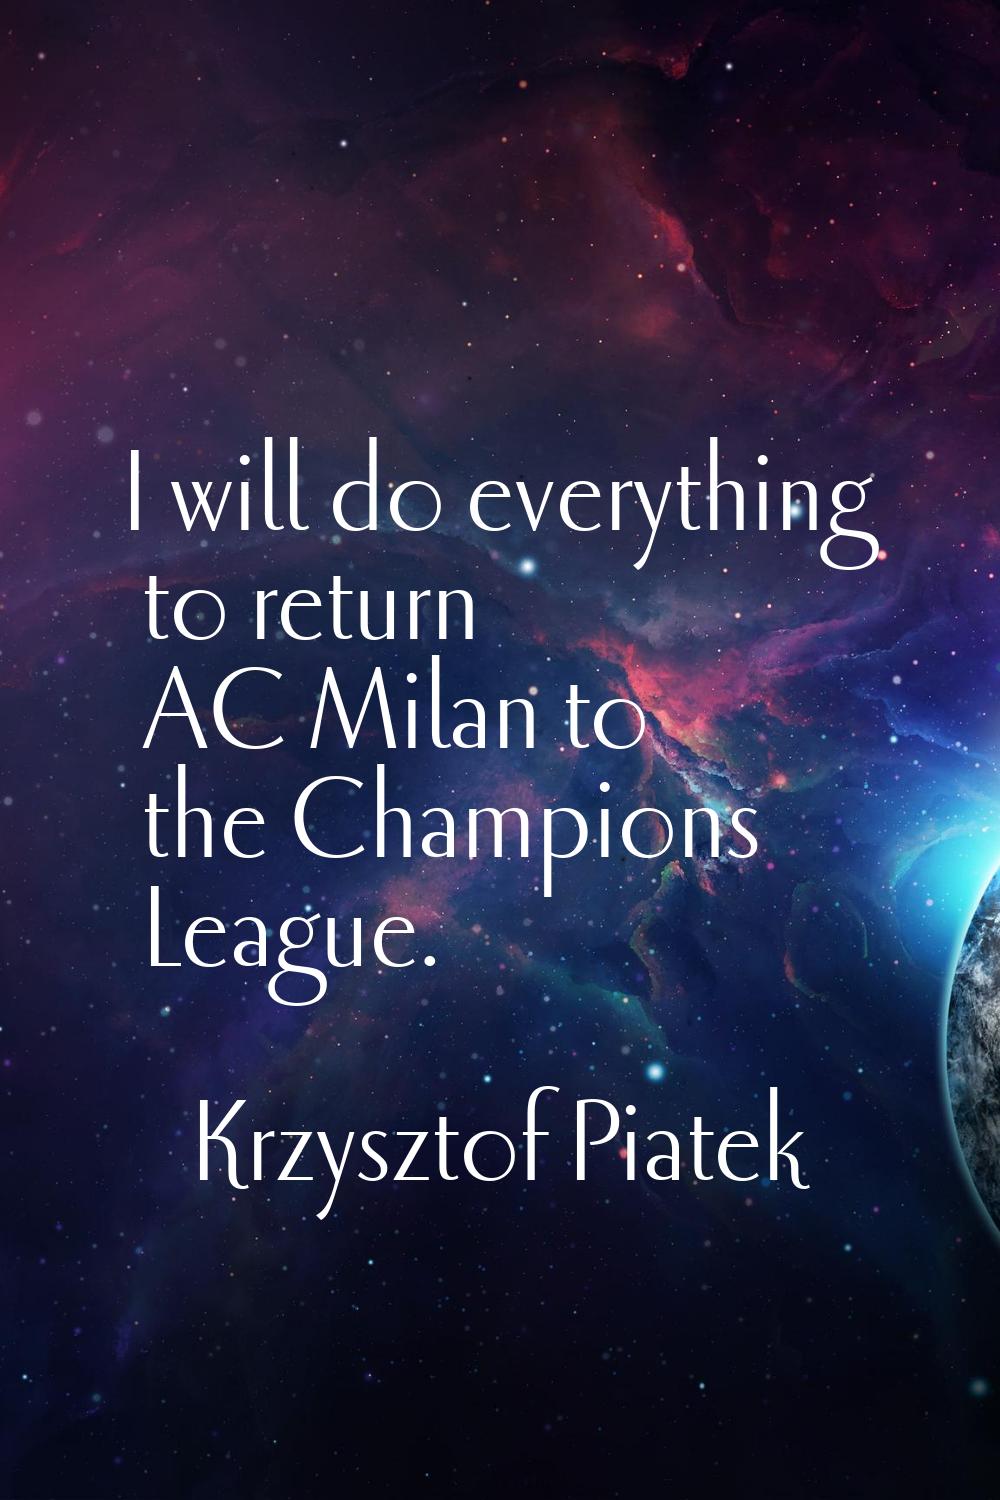 I will do everything to return AC Milan to the Champions League.